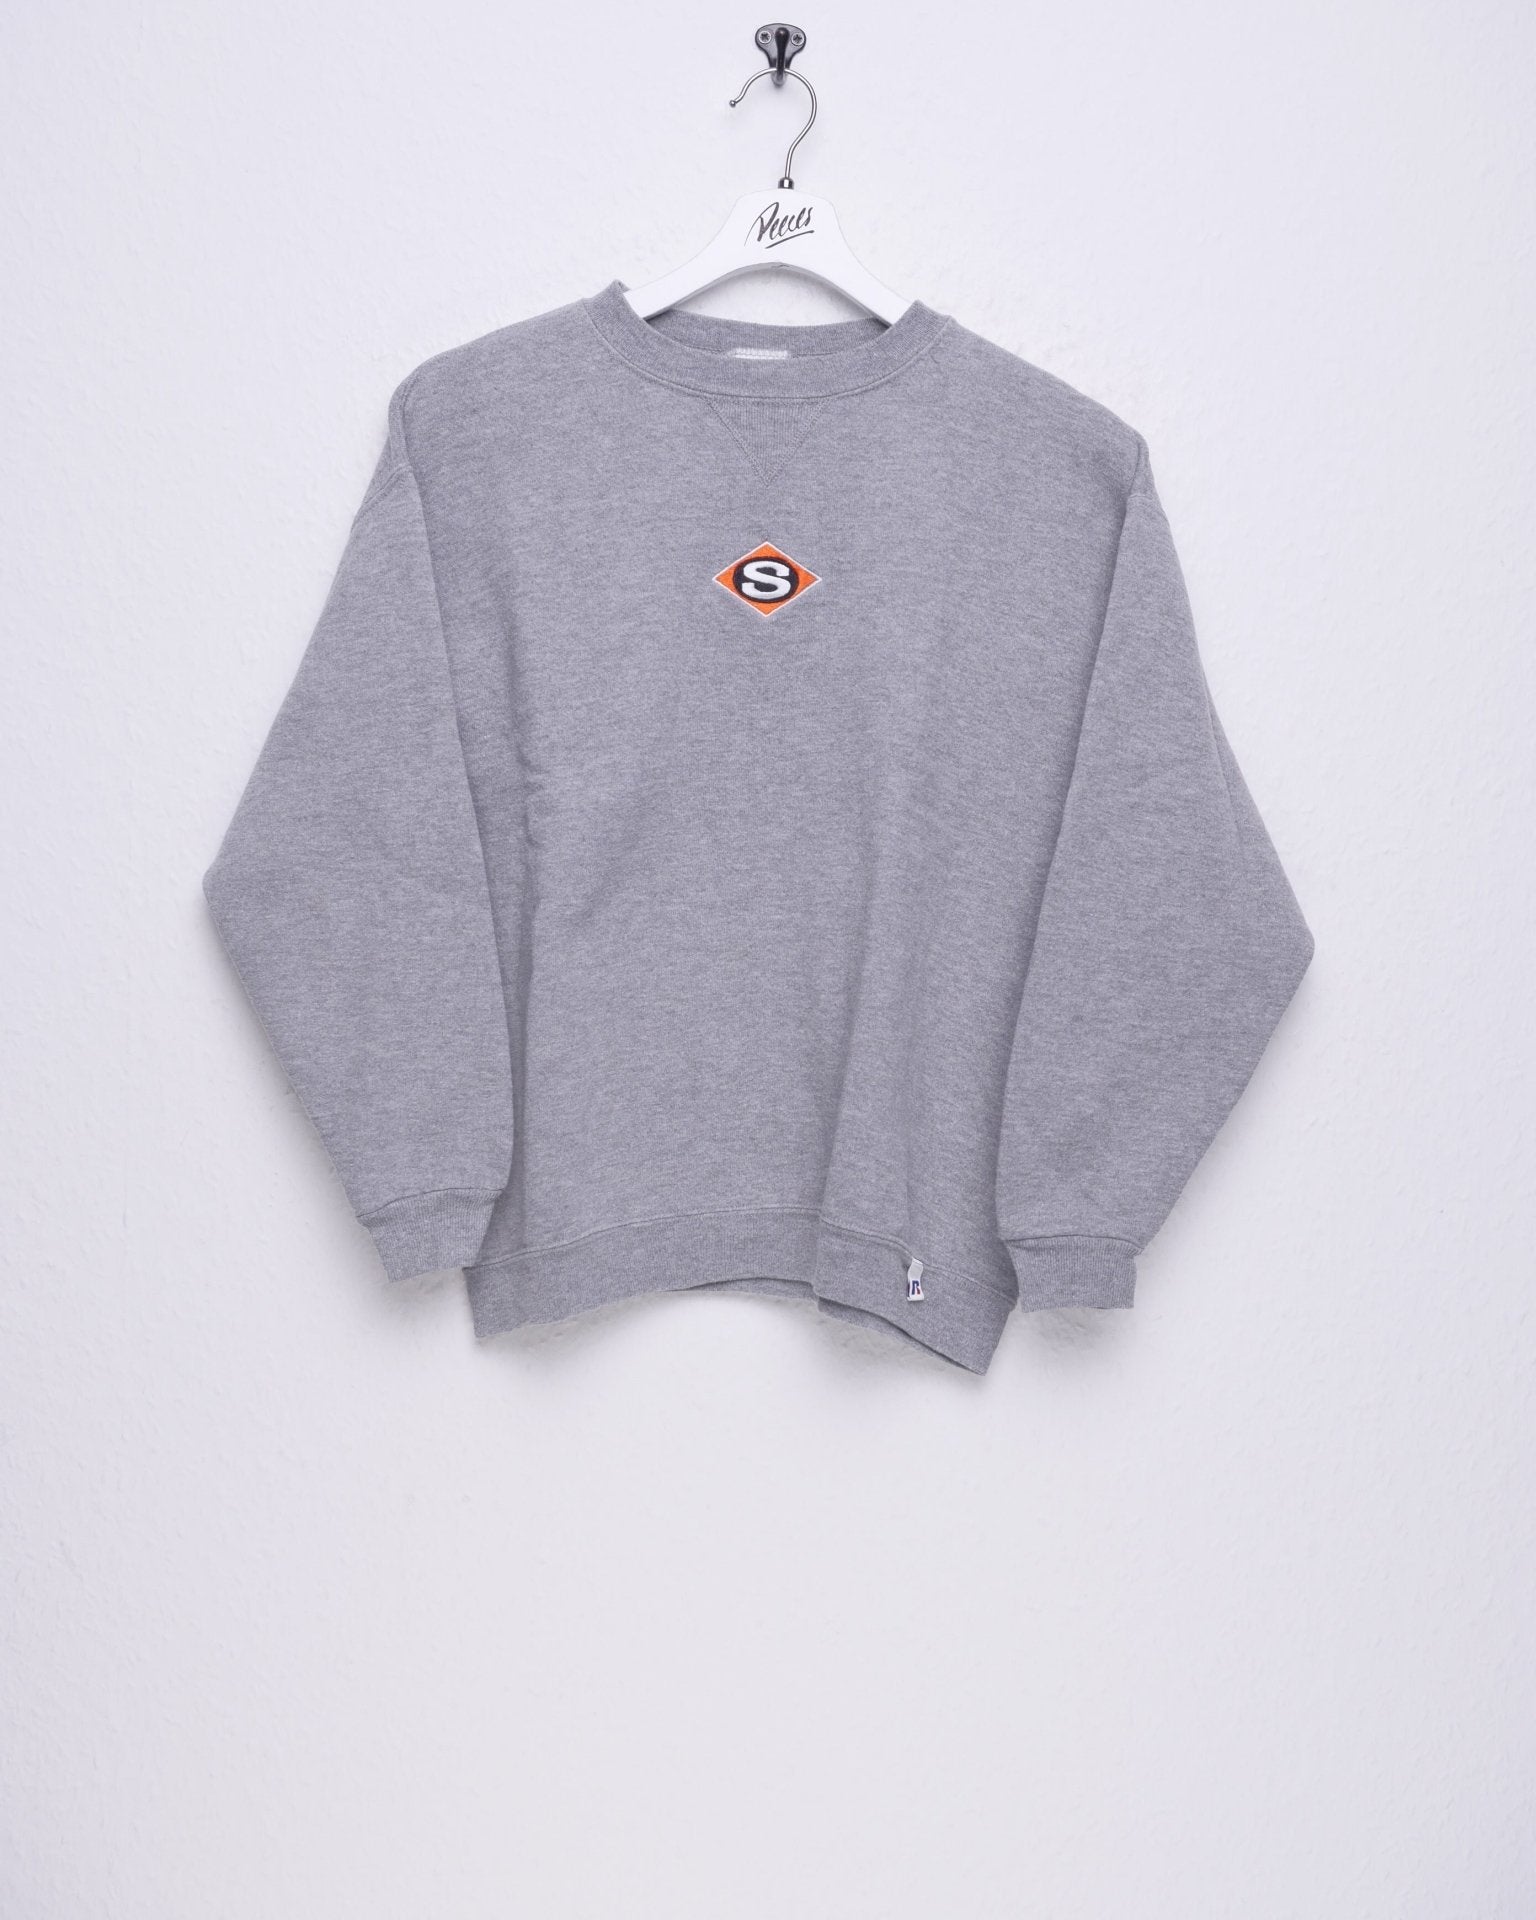 Russell Athletic 'S' embroidered Logo Sweater - Peeces